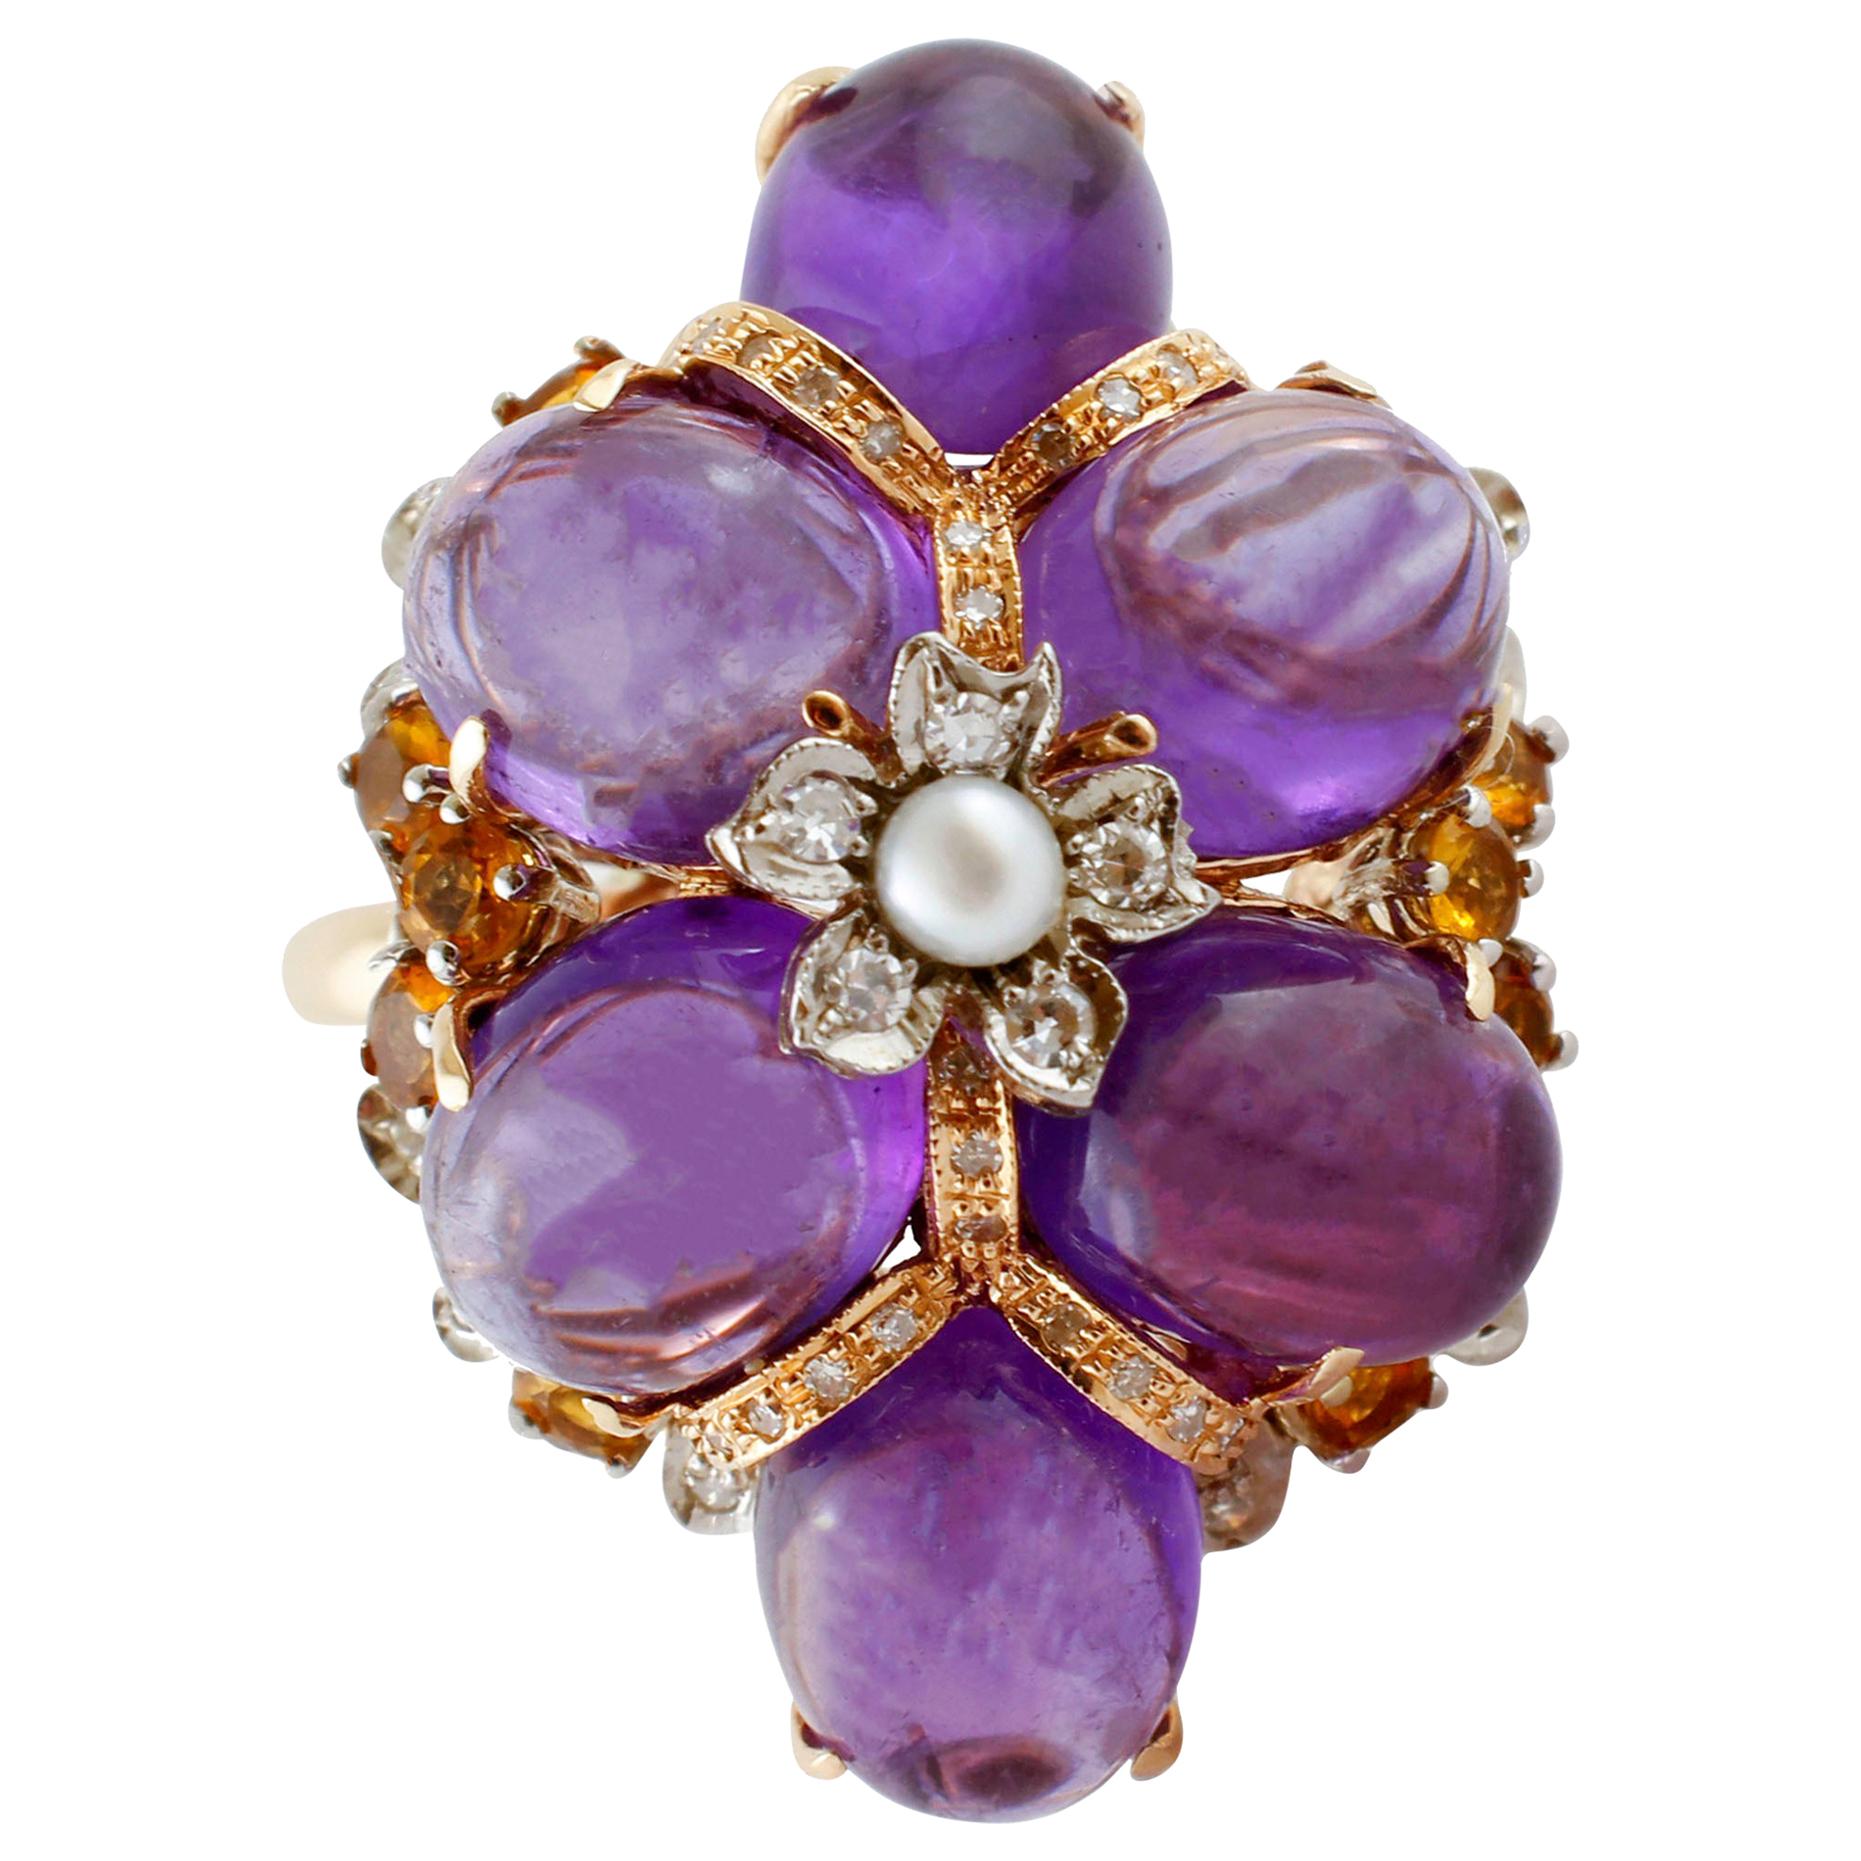 Diamonds, Amethyst, Yellow Topaz, Pearl, Rose and White Gold Cluster Retrò Ring